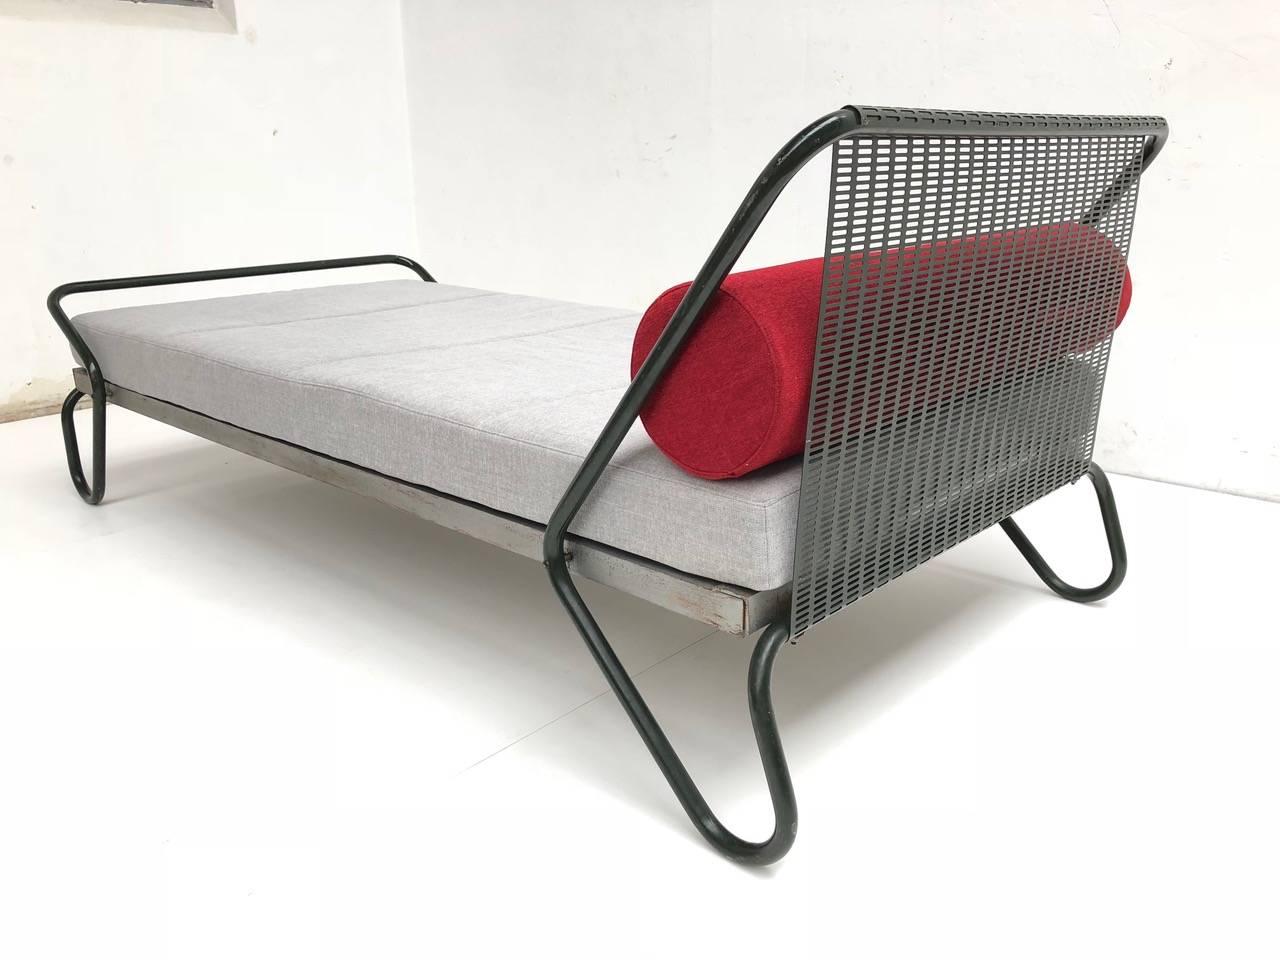 French 1952 'Miami' Daybed by Jacques Hitier for the Famous 'Antony' Building, Paris